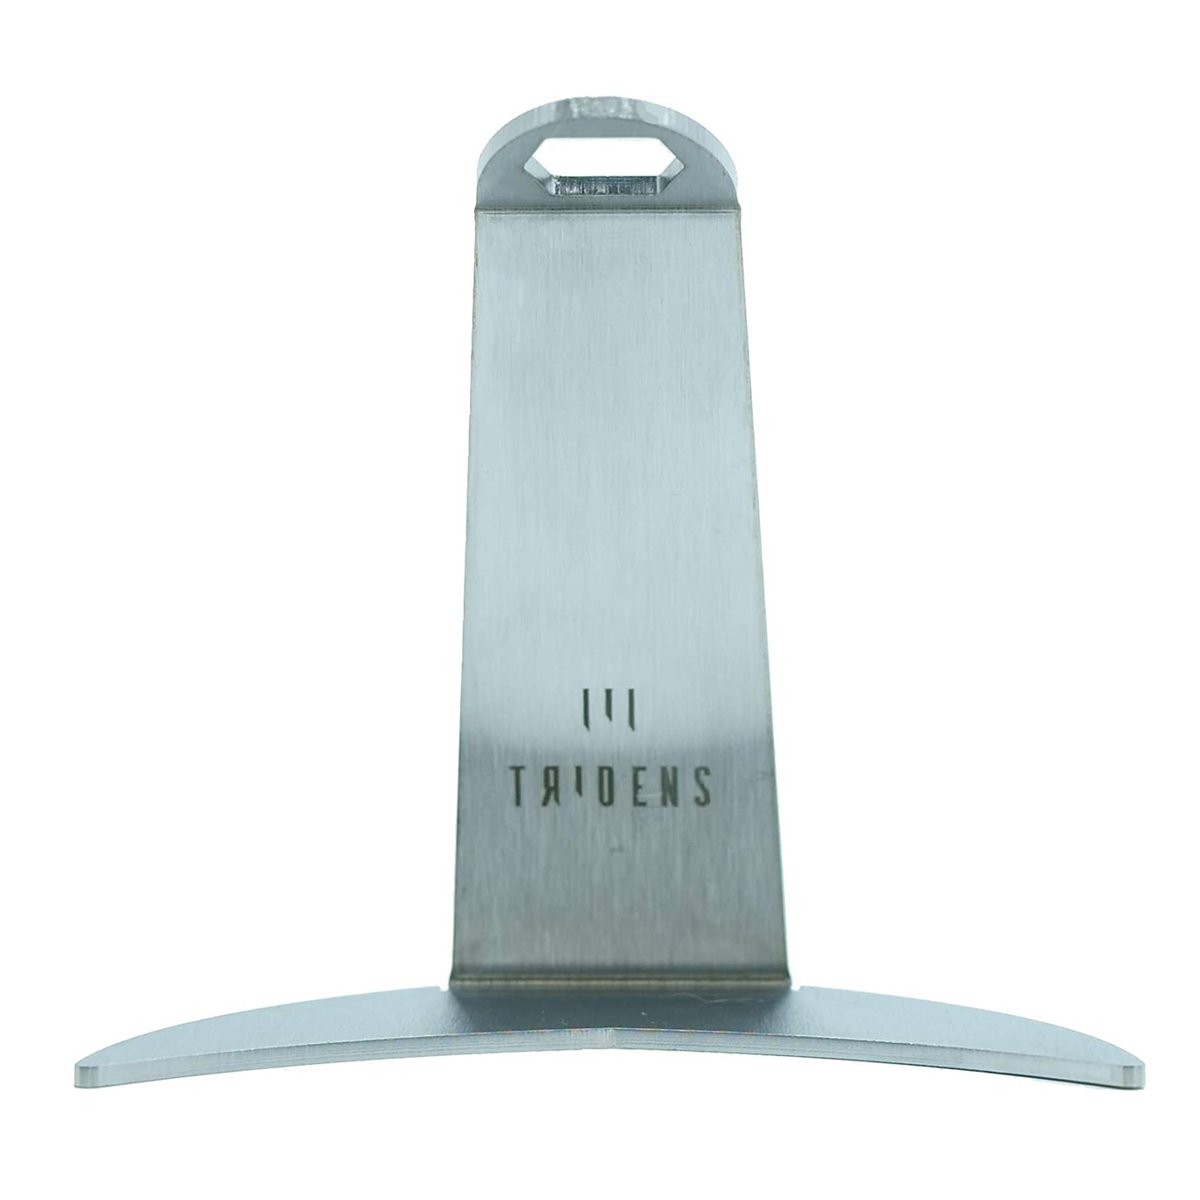 Tridens Hand Finished Ergonomic Brushed Stainless Steel Fork With Stainless Steel Holder